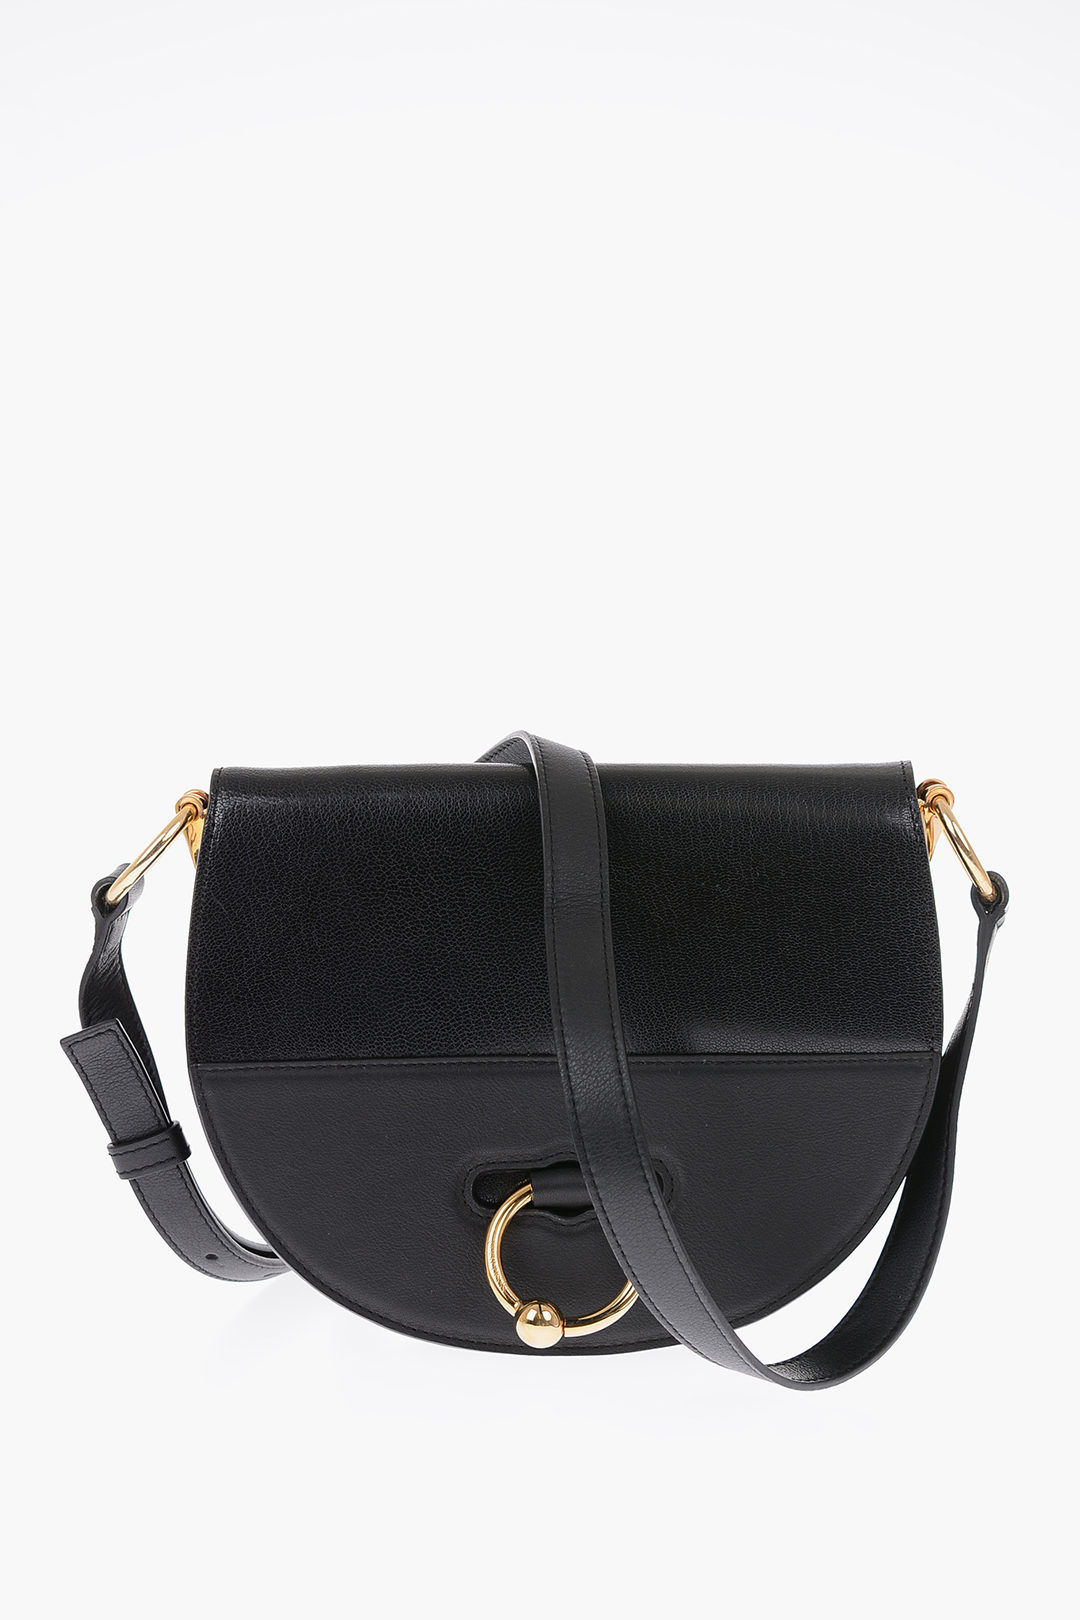 J.W.Anderson leather LATCH Crossbody bag women - Glamood Outlet